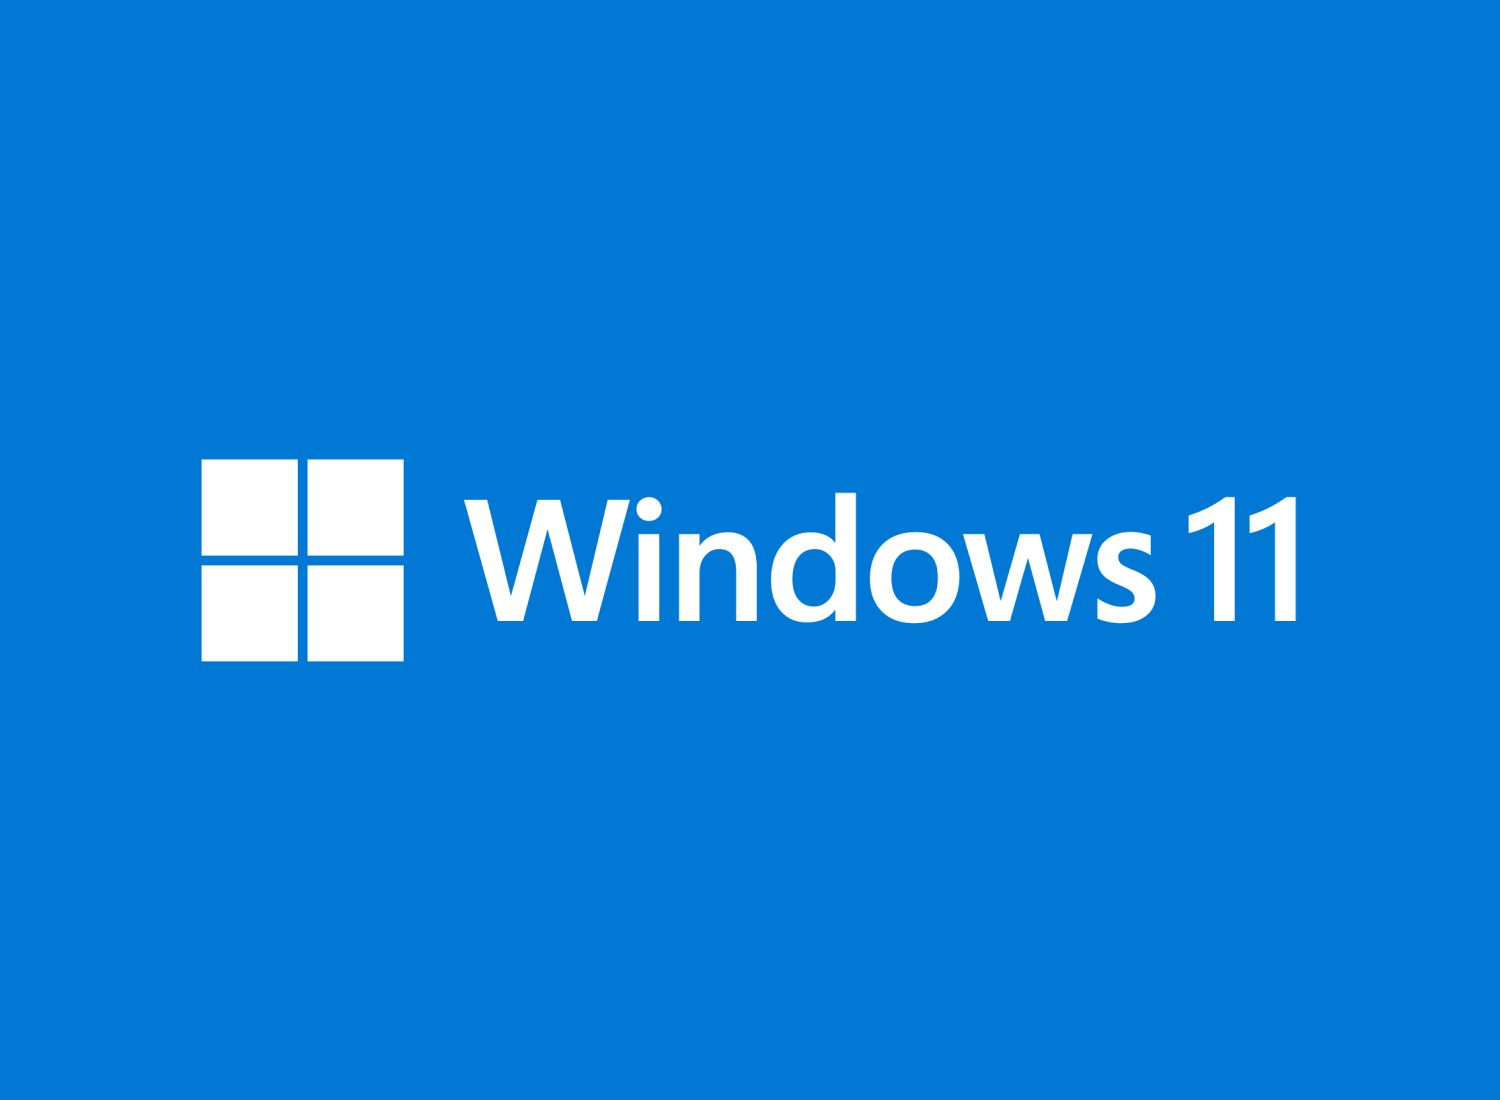 Announcing Windows 11 Insider Preview Build 22000.184